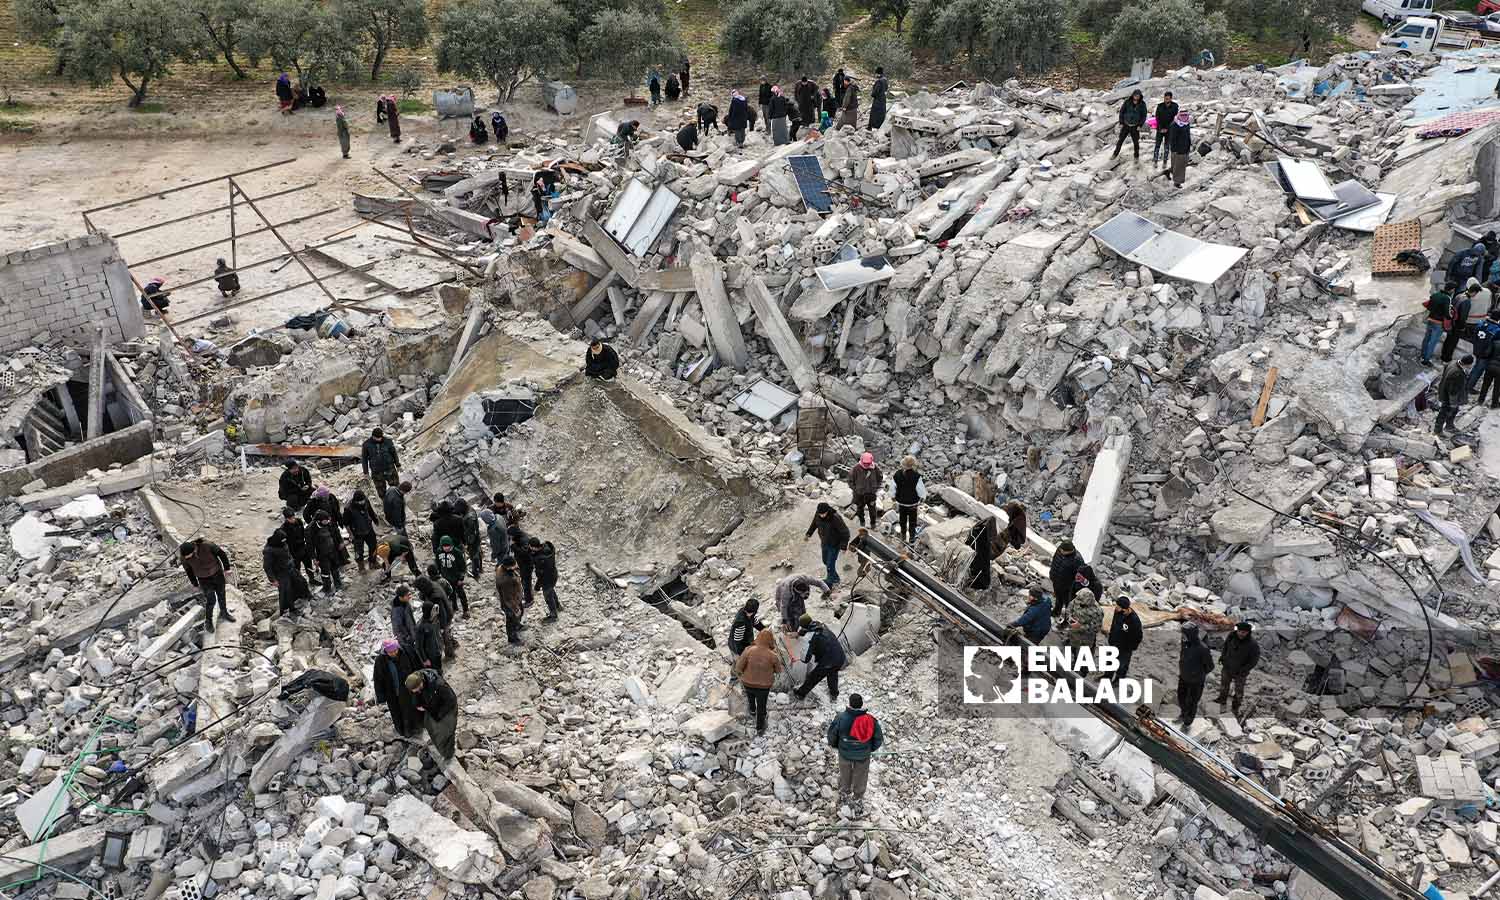 Volunteers attempting to rescue the victims from under the rubble in the Harem area following an earthquake in northwestern Syria - February 6, 2023 (Enab Baladi/Mohammad Nasan Dabel)